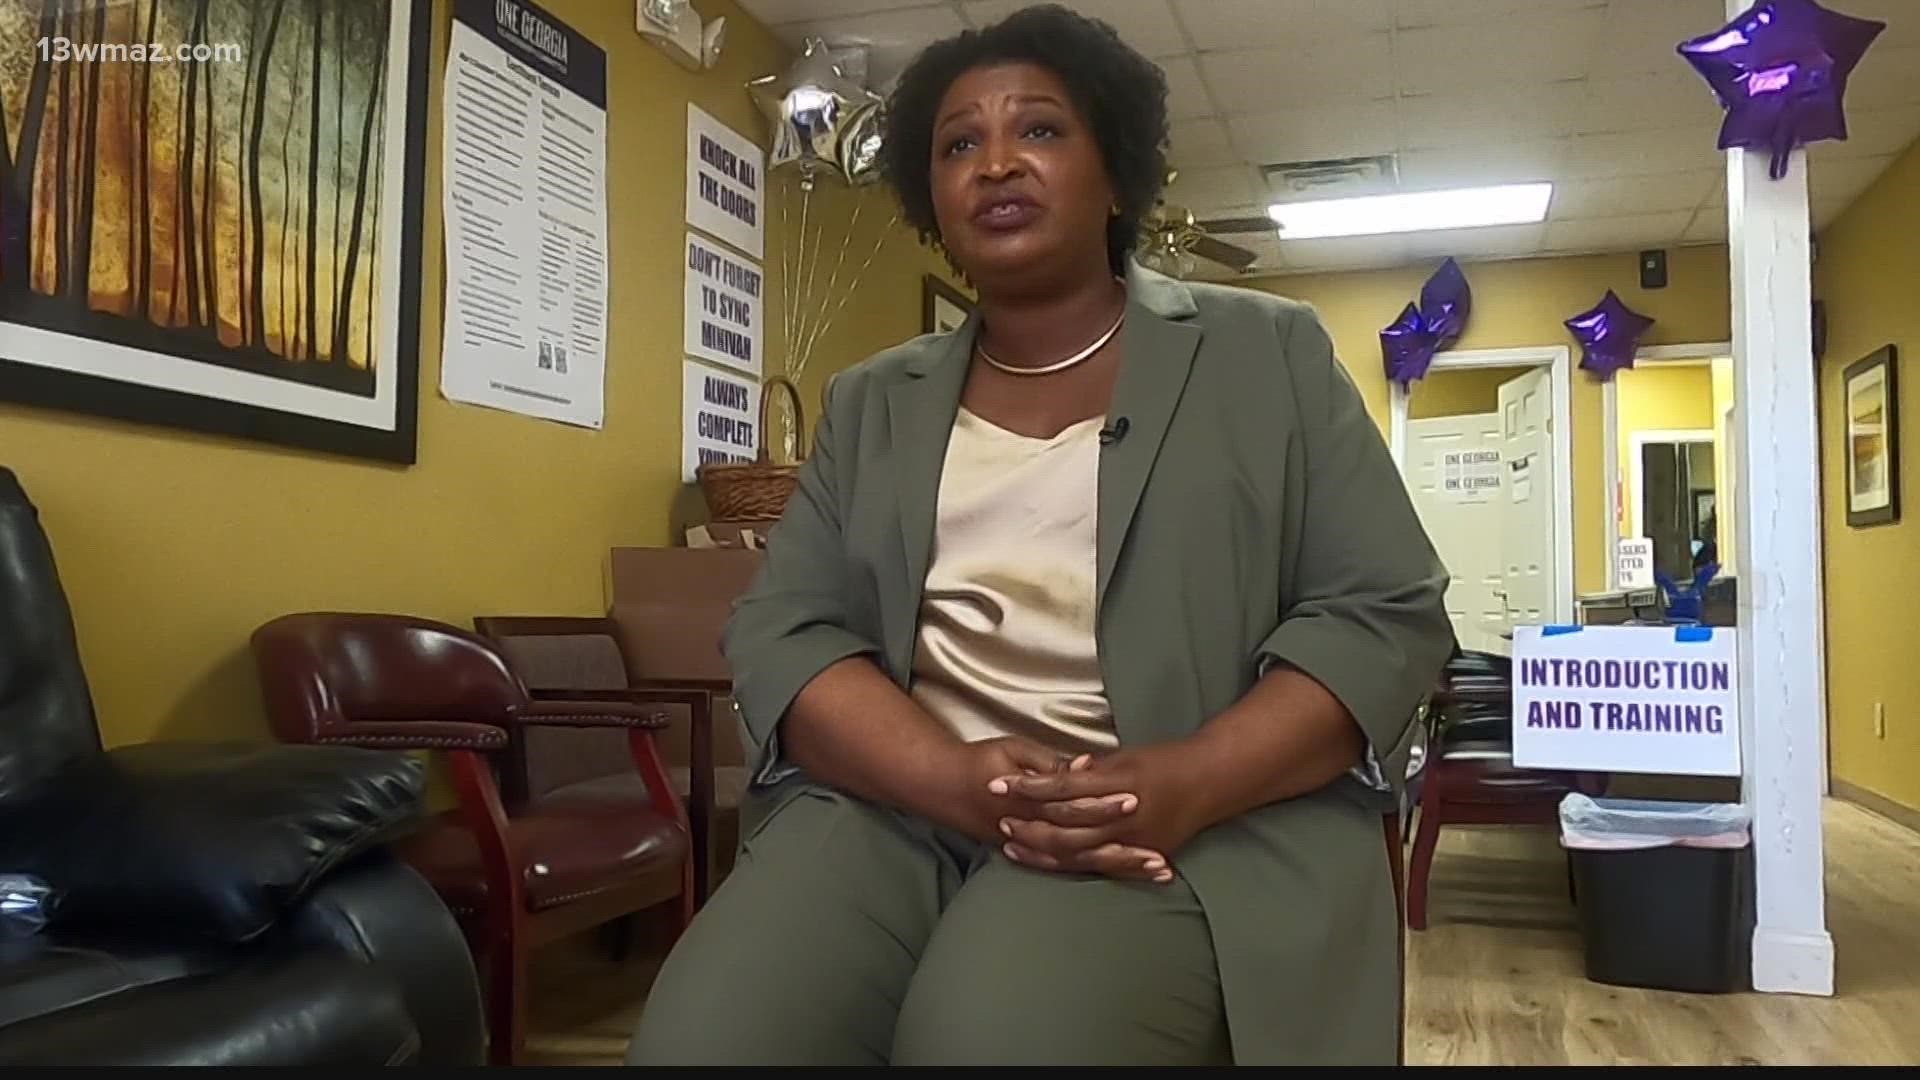 Gubernatorial candidate Stacey Abrams spoke about what's important to her in her second run